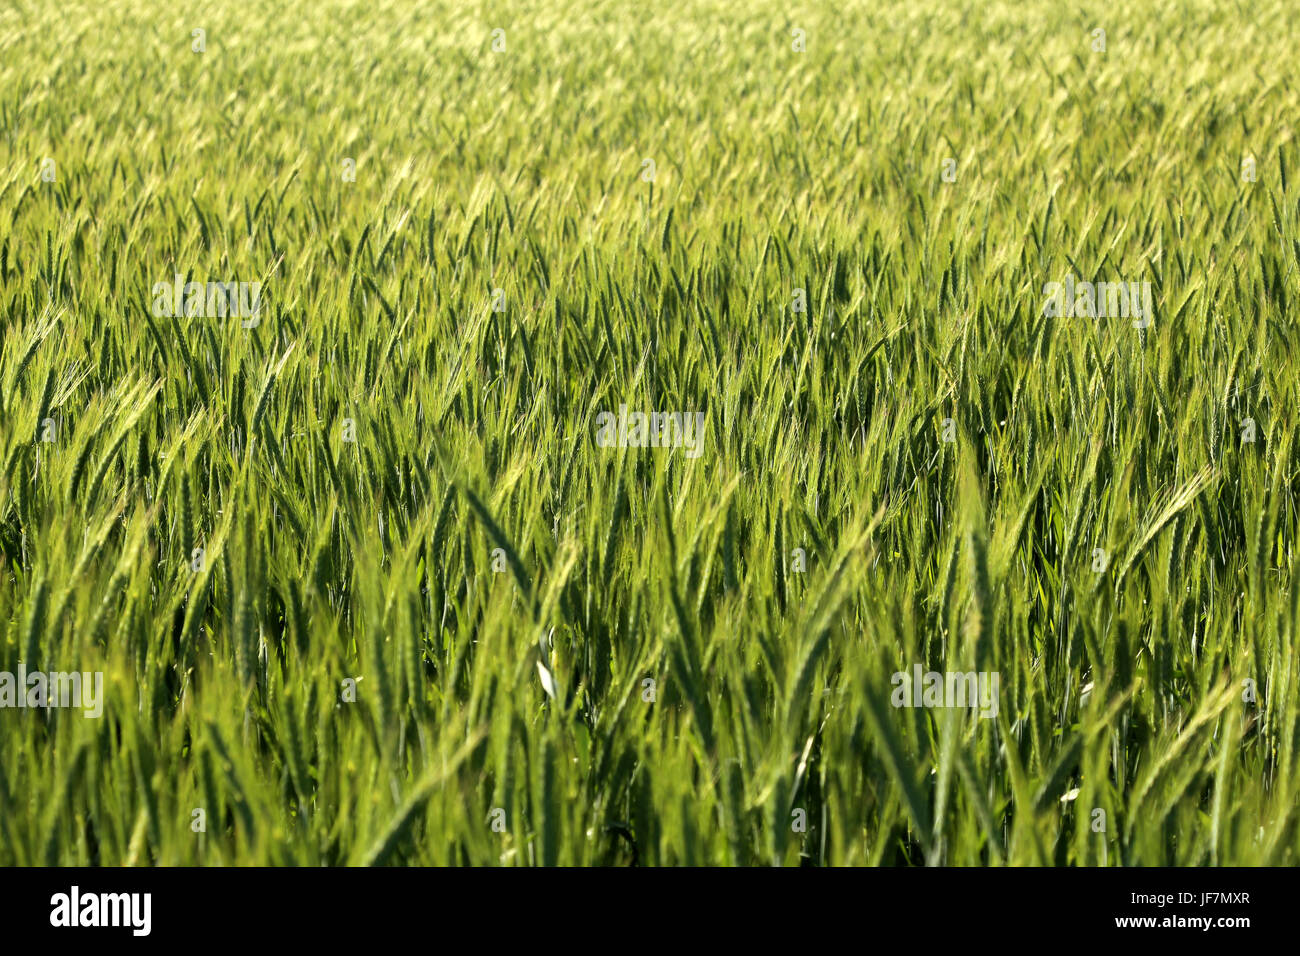 A green field in summer Stock Photo